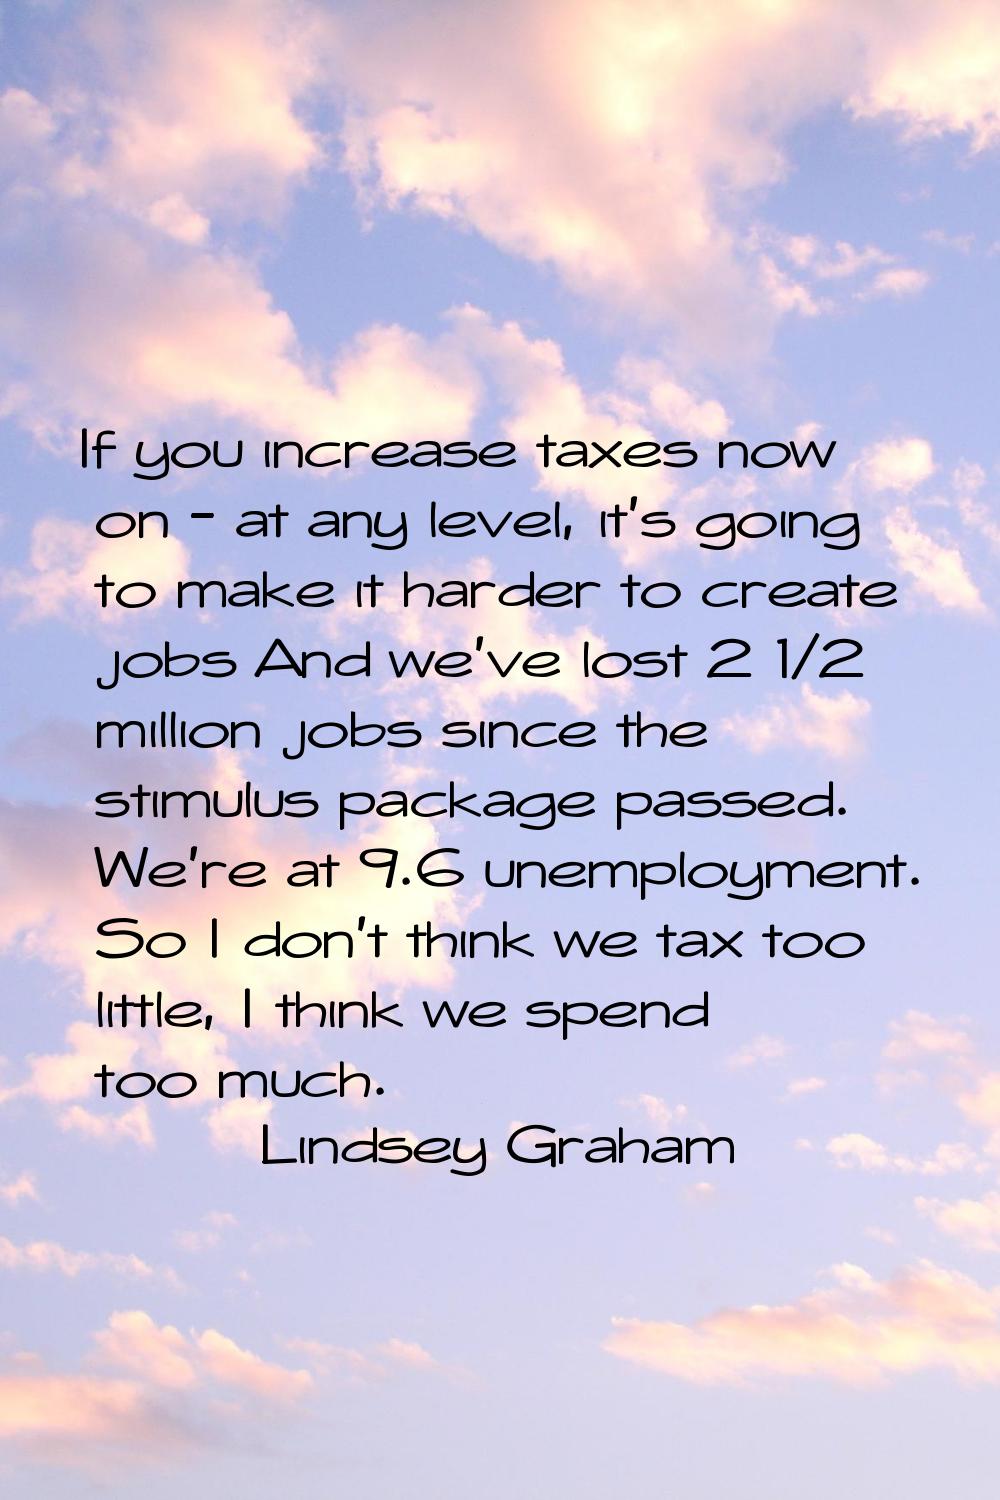 If you increase taxes now on - at any level, it's going to make it harder to create jobs And we've 